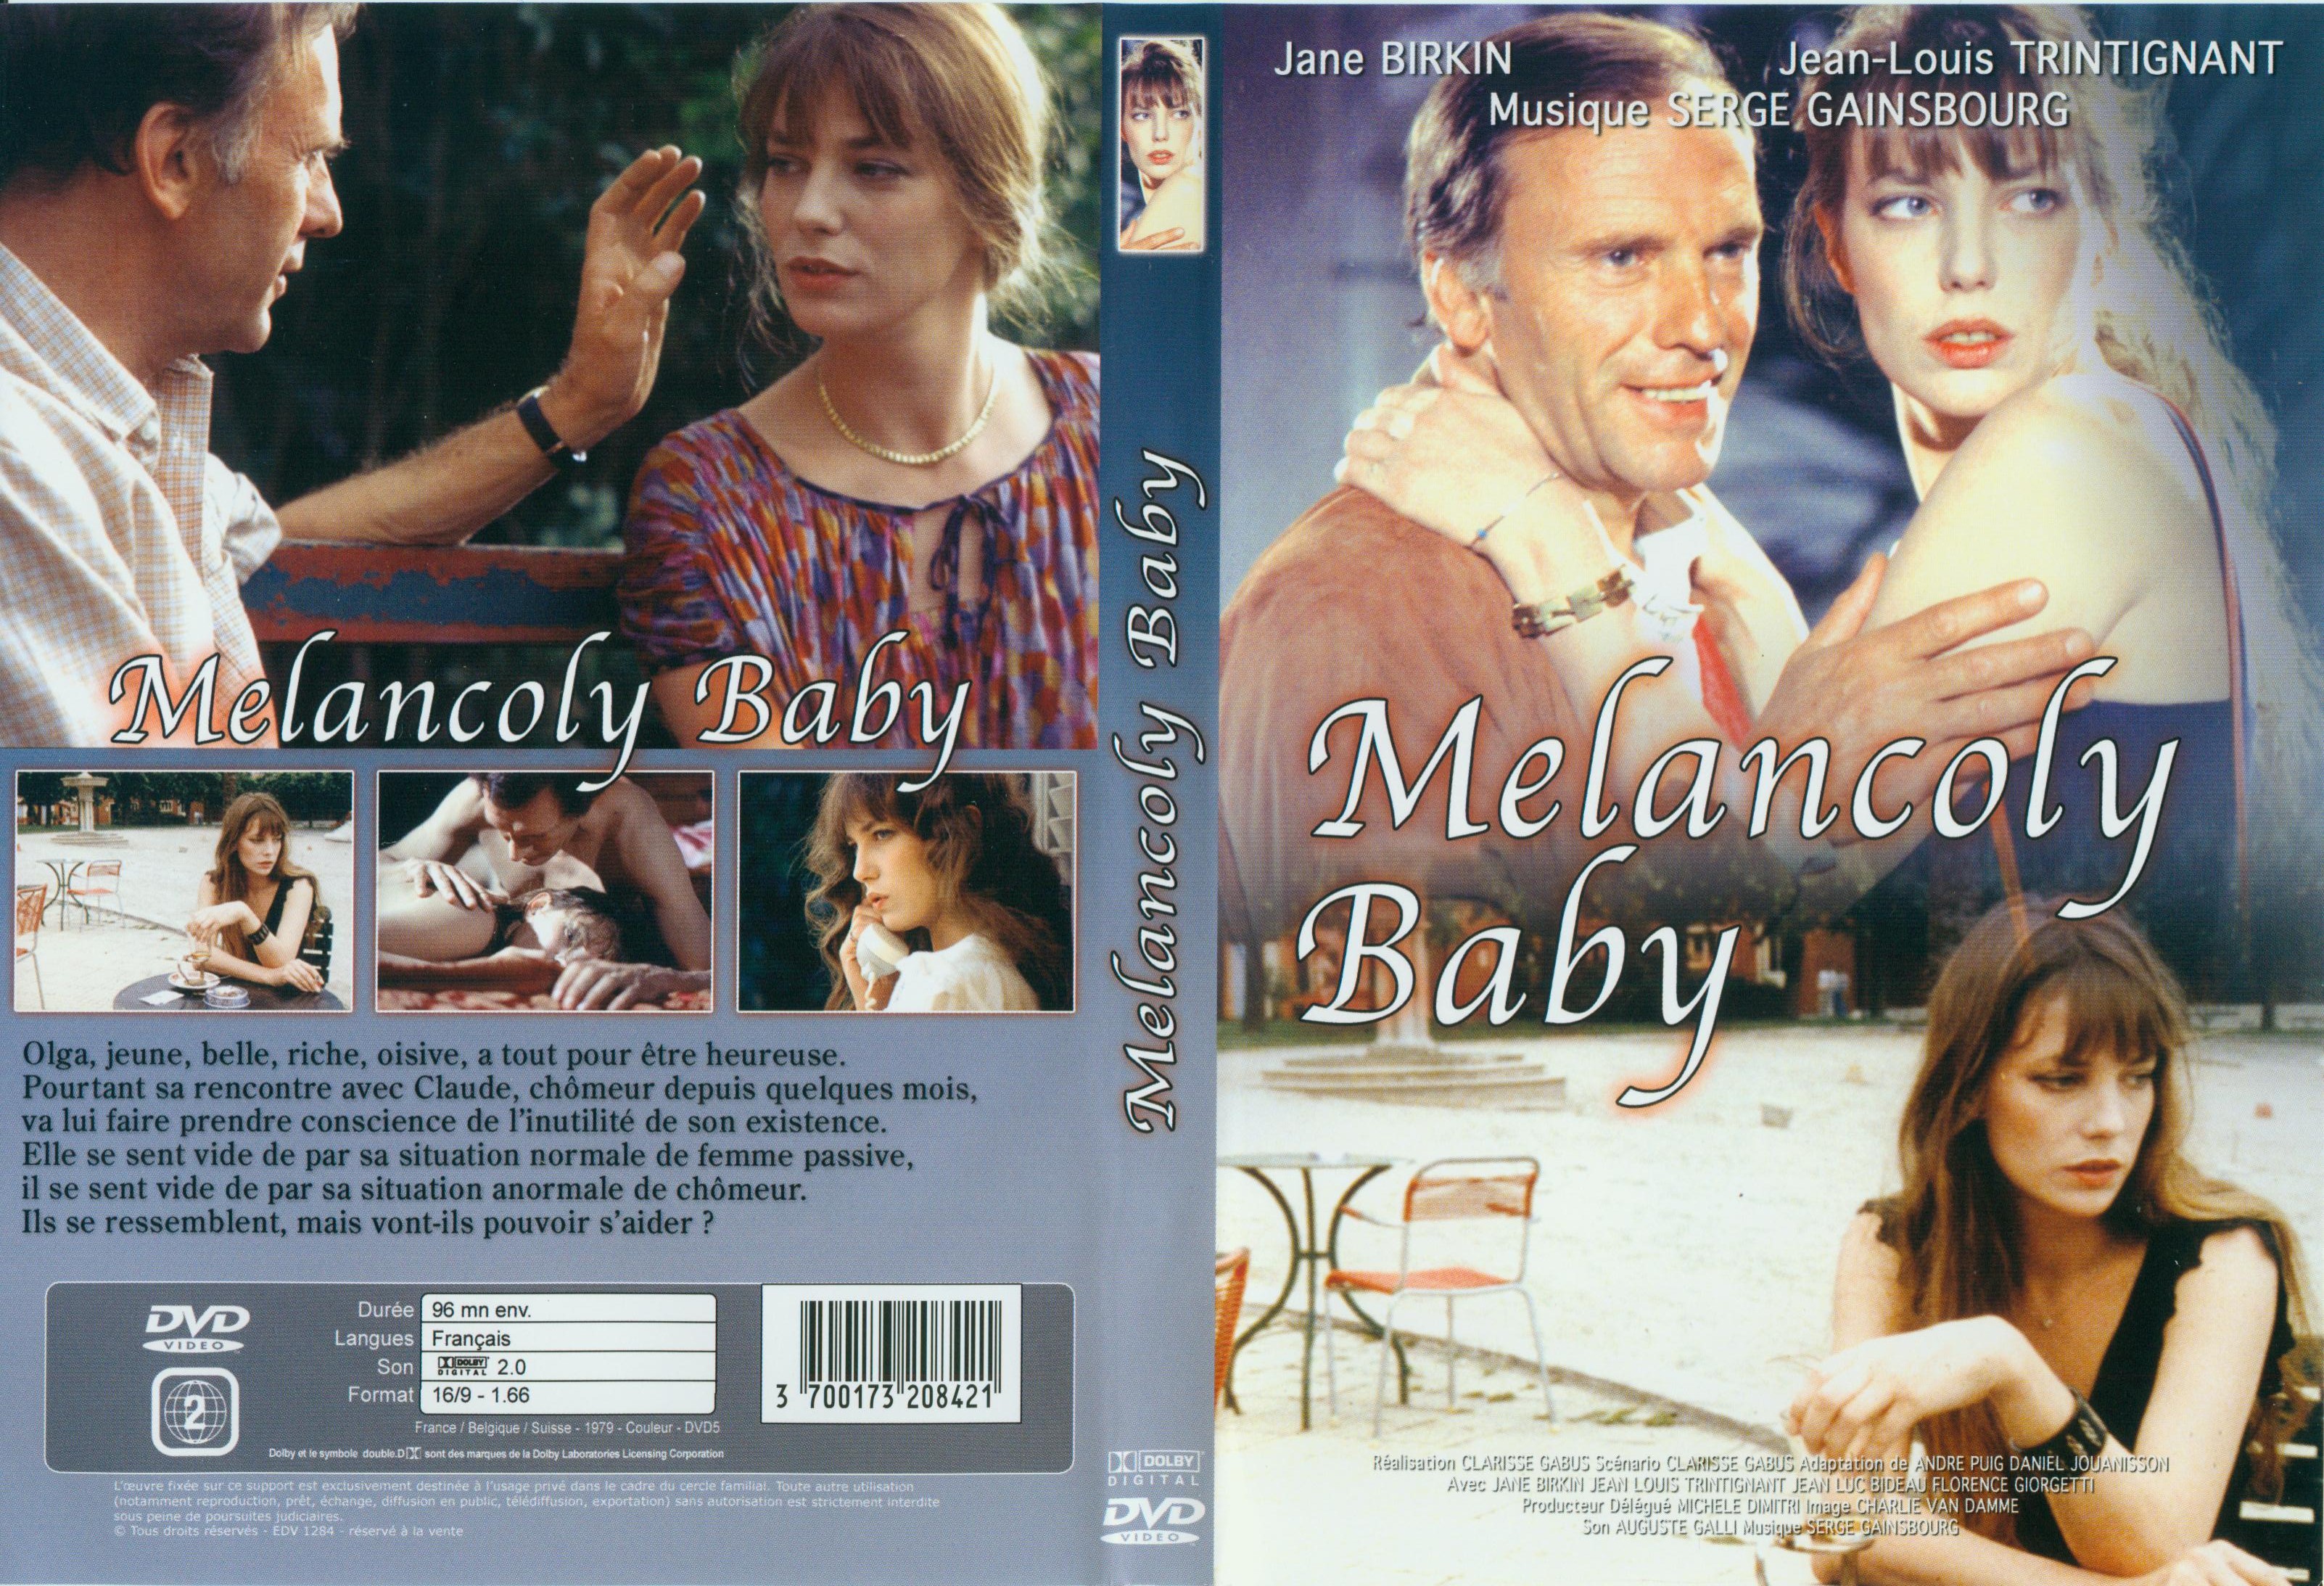 Jaquette DVD Melancoly baby